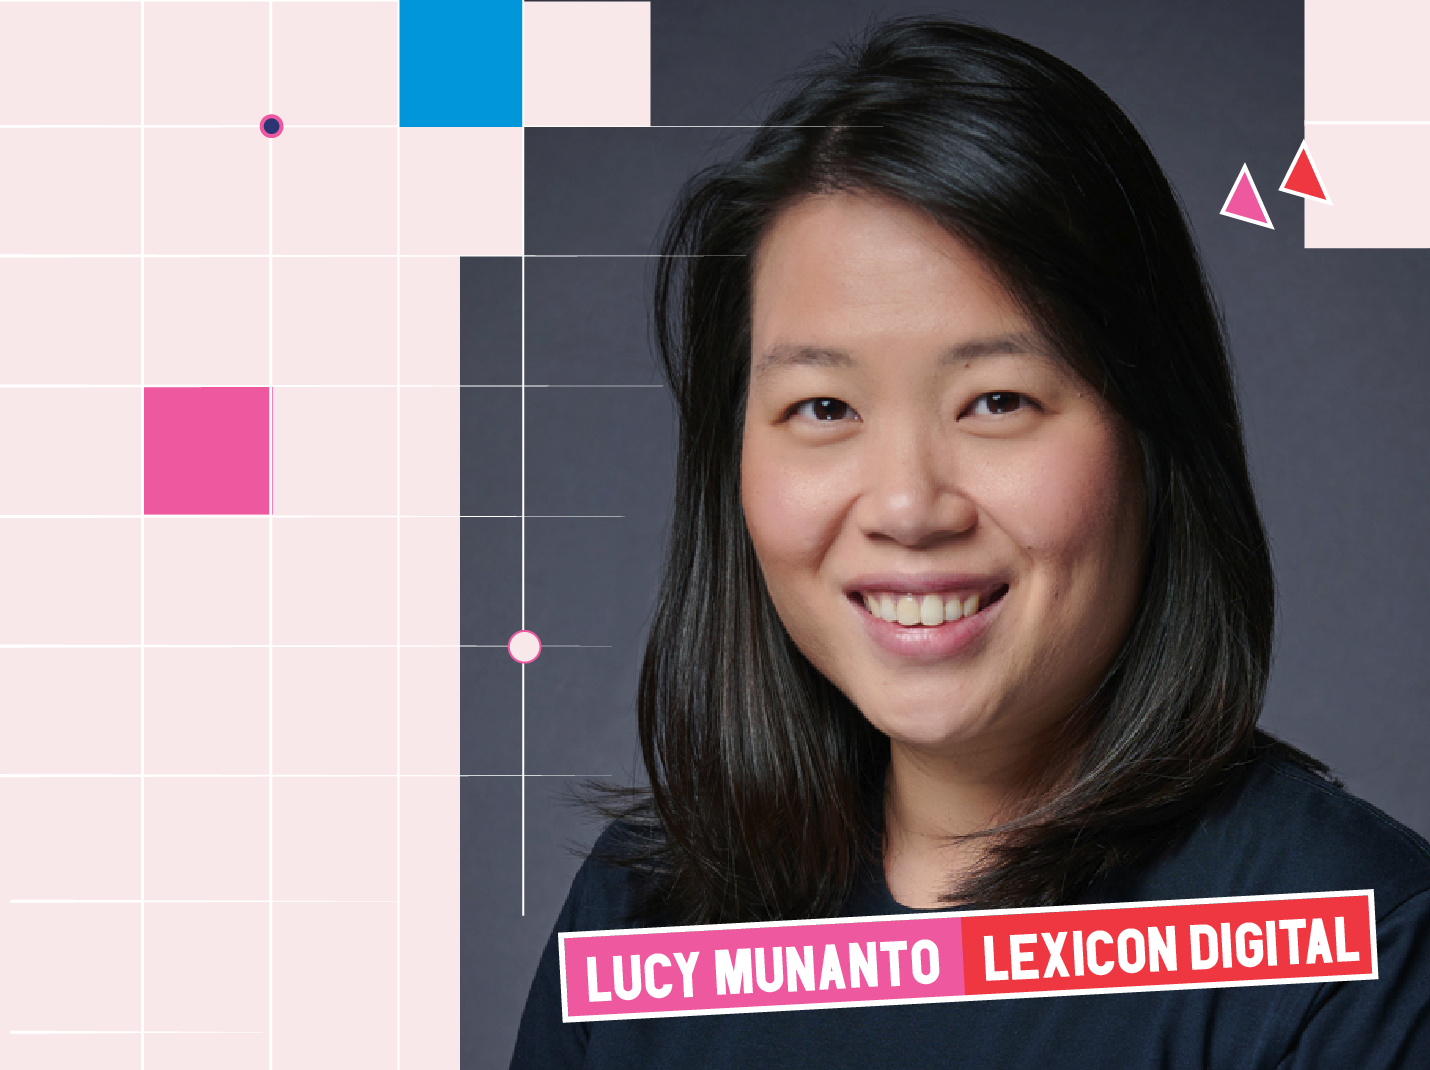 A headshot photo of Lucy Munanto, in front of a grey backdrop. She is a woman of Chinese Indonesian decent, with tanned skin and black shoulder length hair, parted at the side. She is smiling and looking direct to camera. Overlayed on the image is her name and the words Lexicon Digital, in block writing against pink and red backgrounds. The image has a graphic border, using square design elements in pale pink, bright pink and blue. 